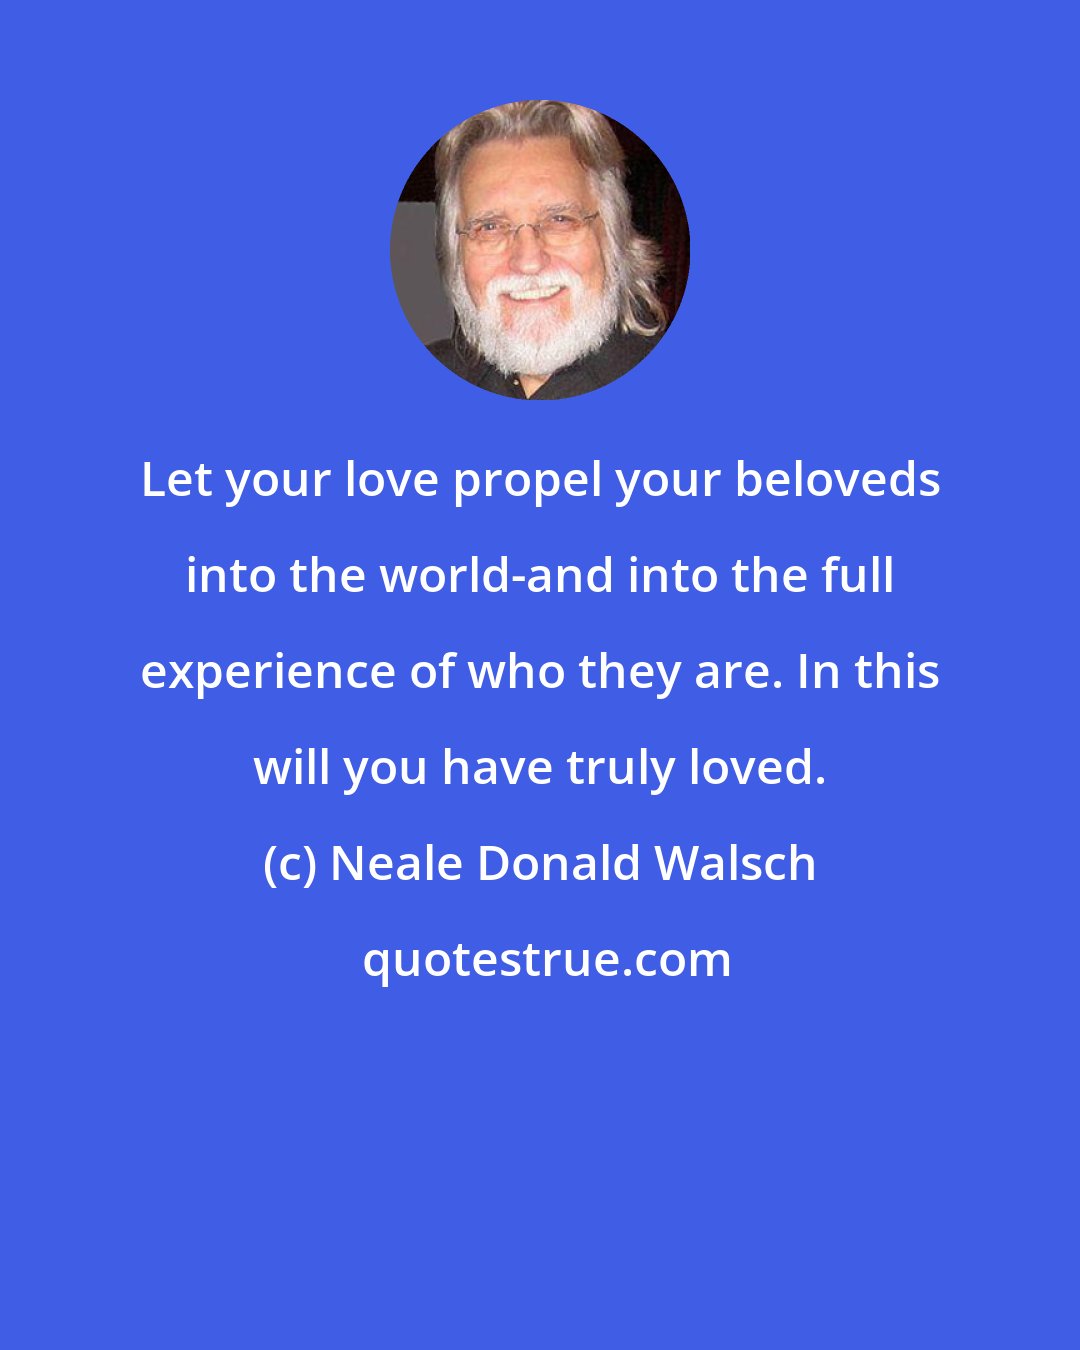 Neale Donald Walsch: Let your love propel your beloveds into the world-and into the full experience of who they are. In this will you have truly loved.